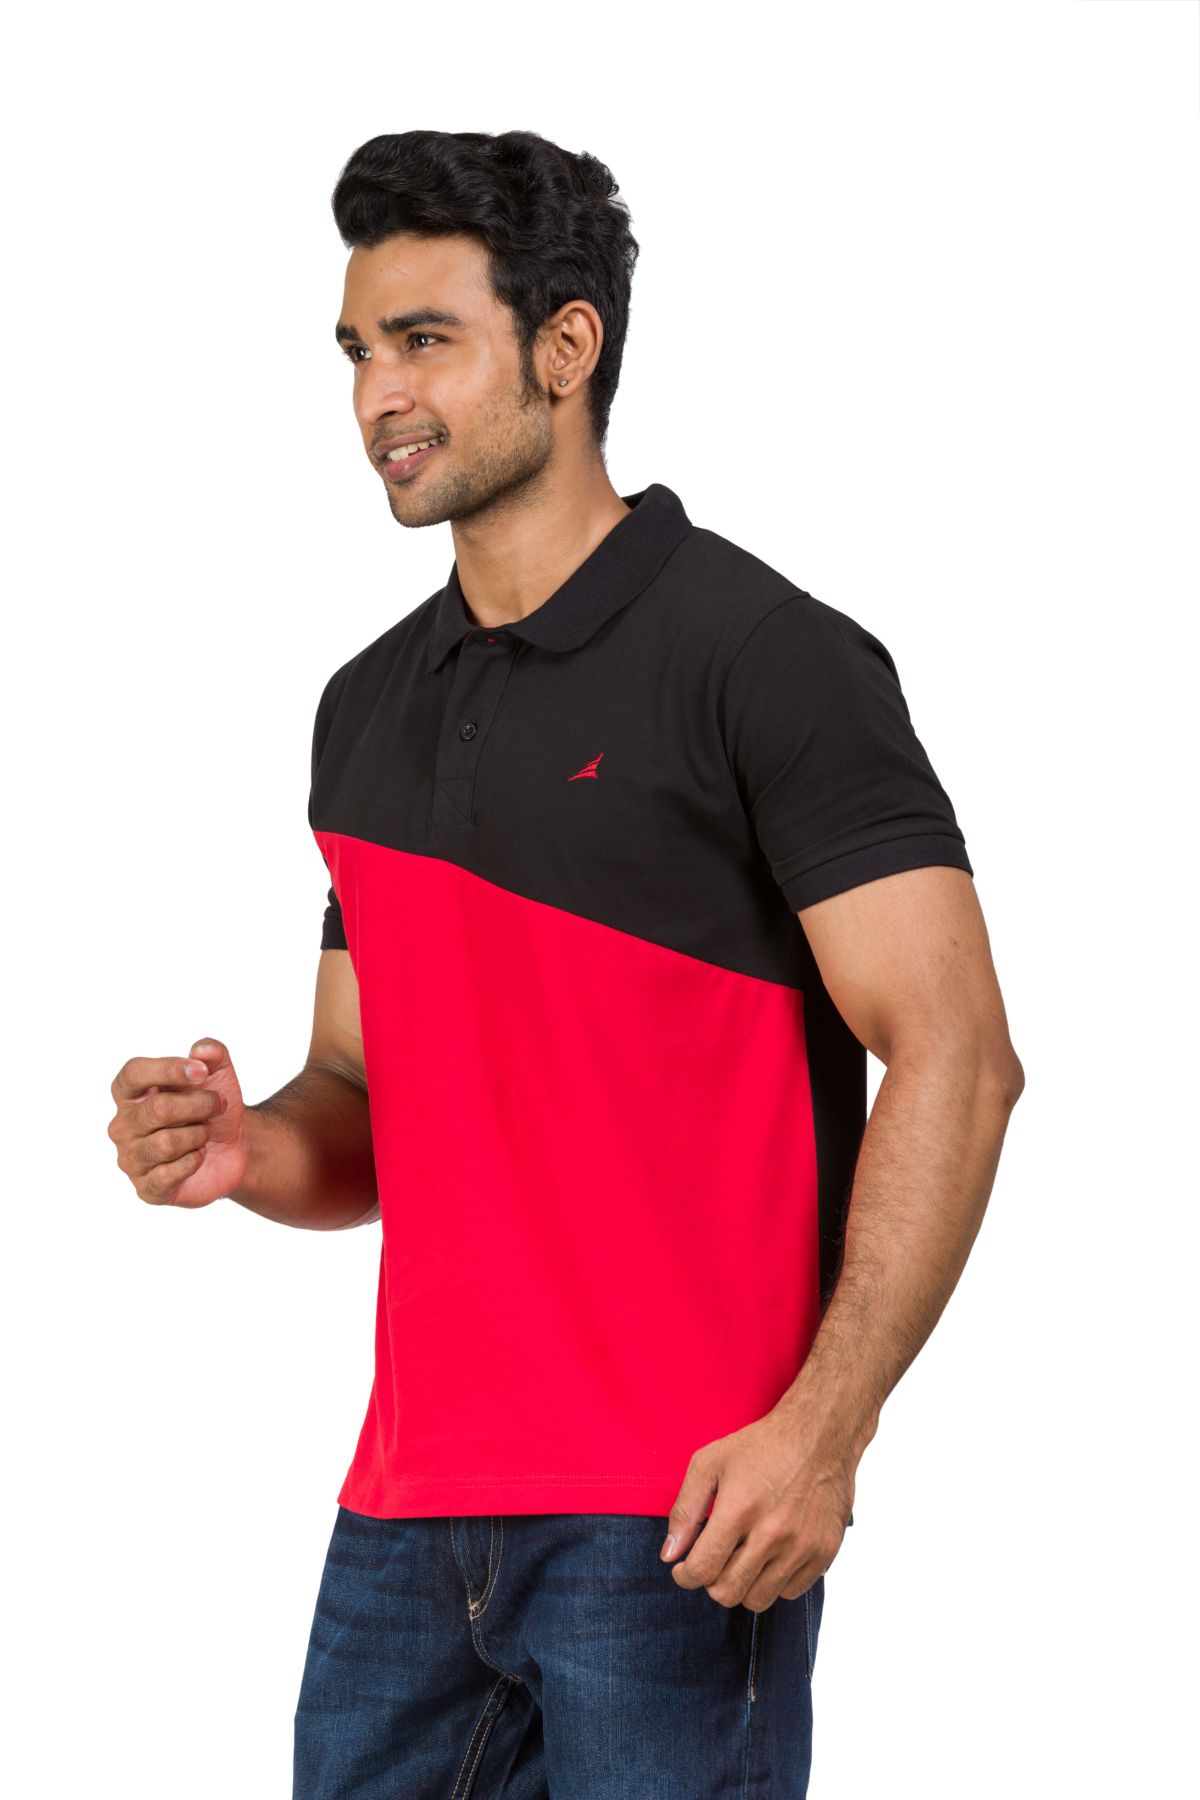 Cotton Blend Polo T-shirt Black-Red for Men